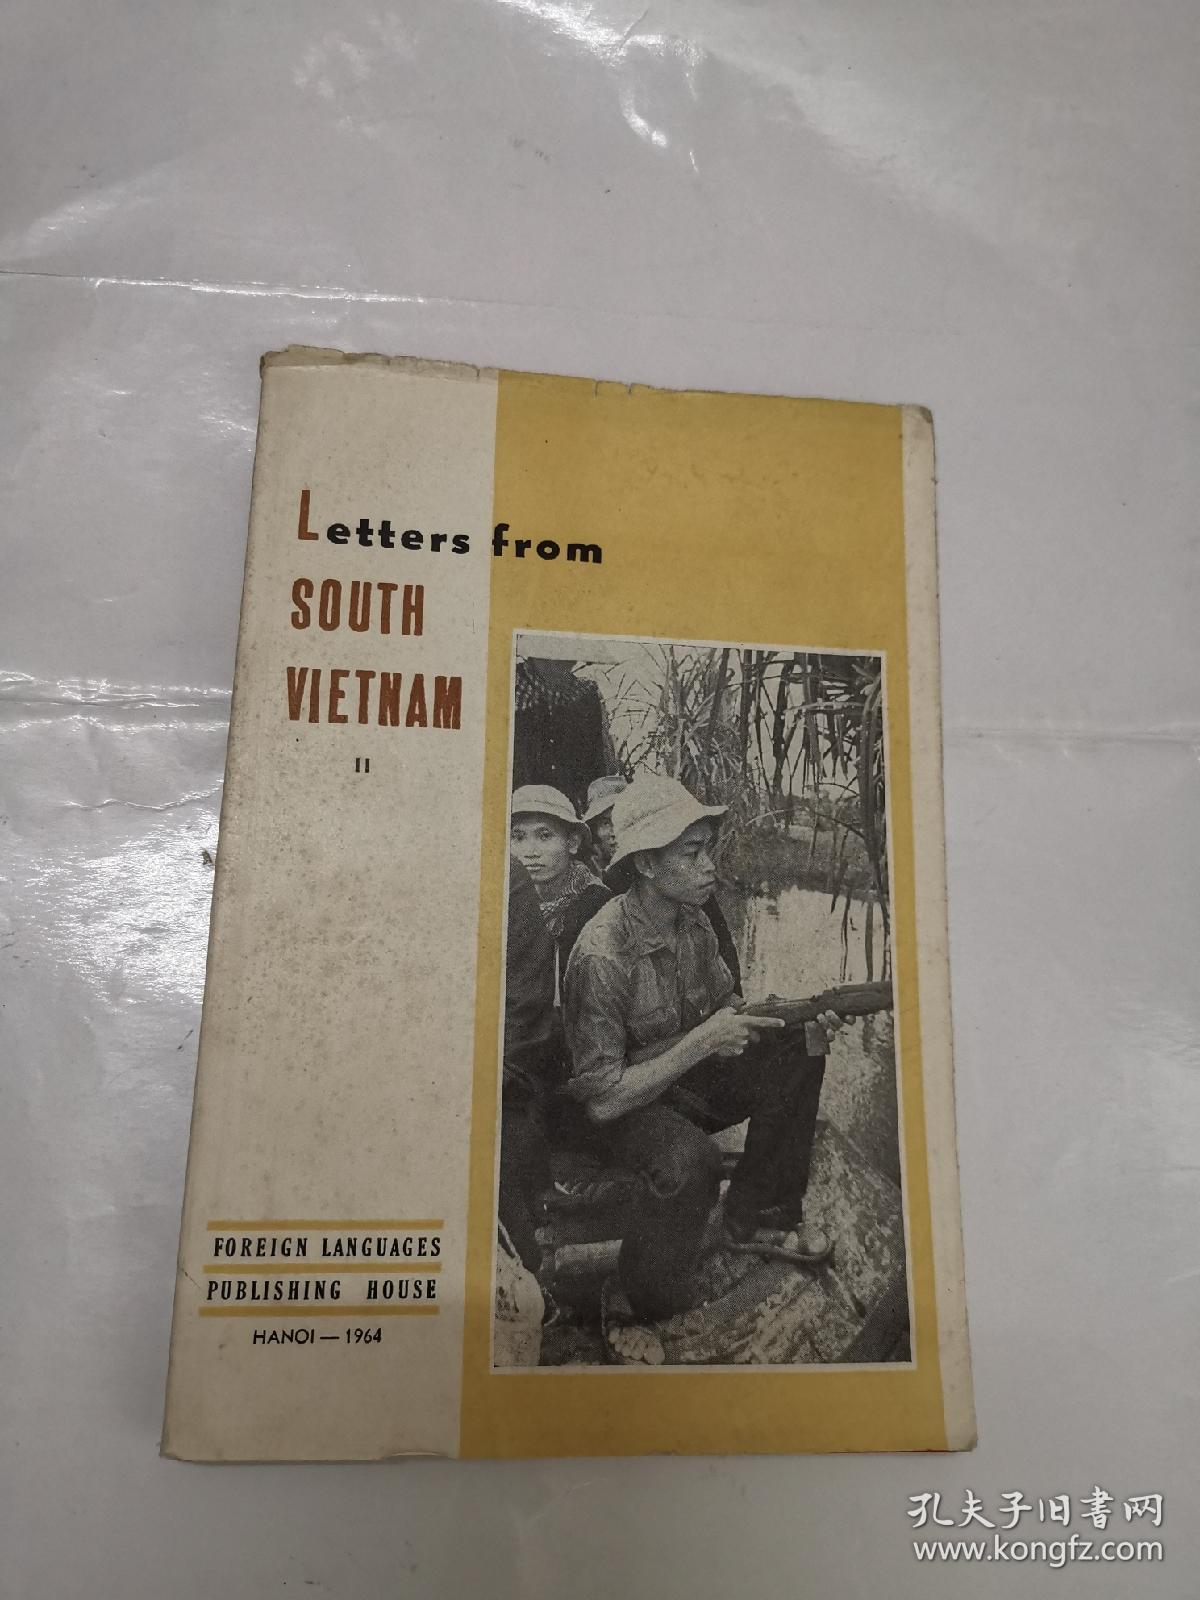 Letters from SOUTH VIETNAM II